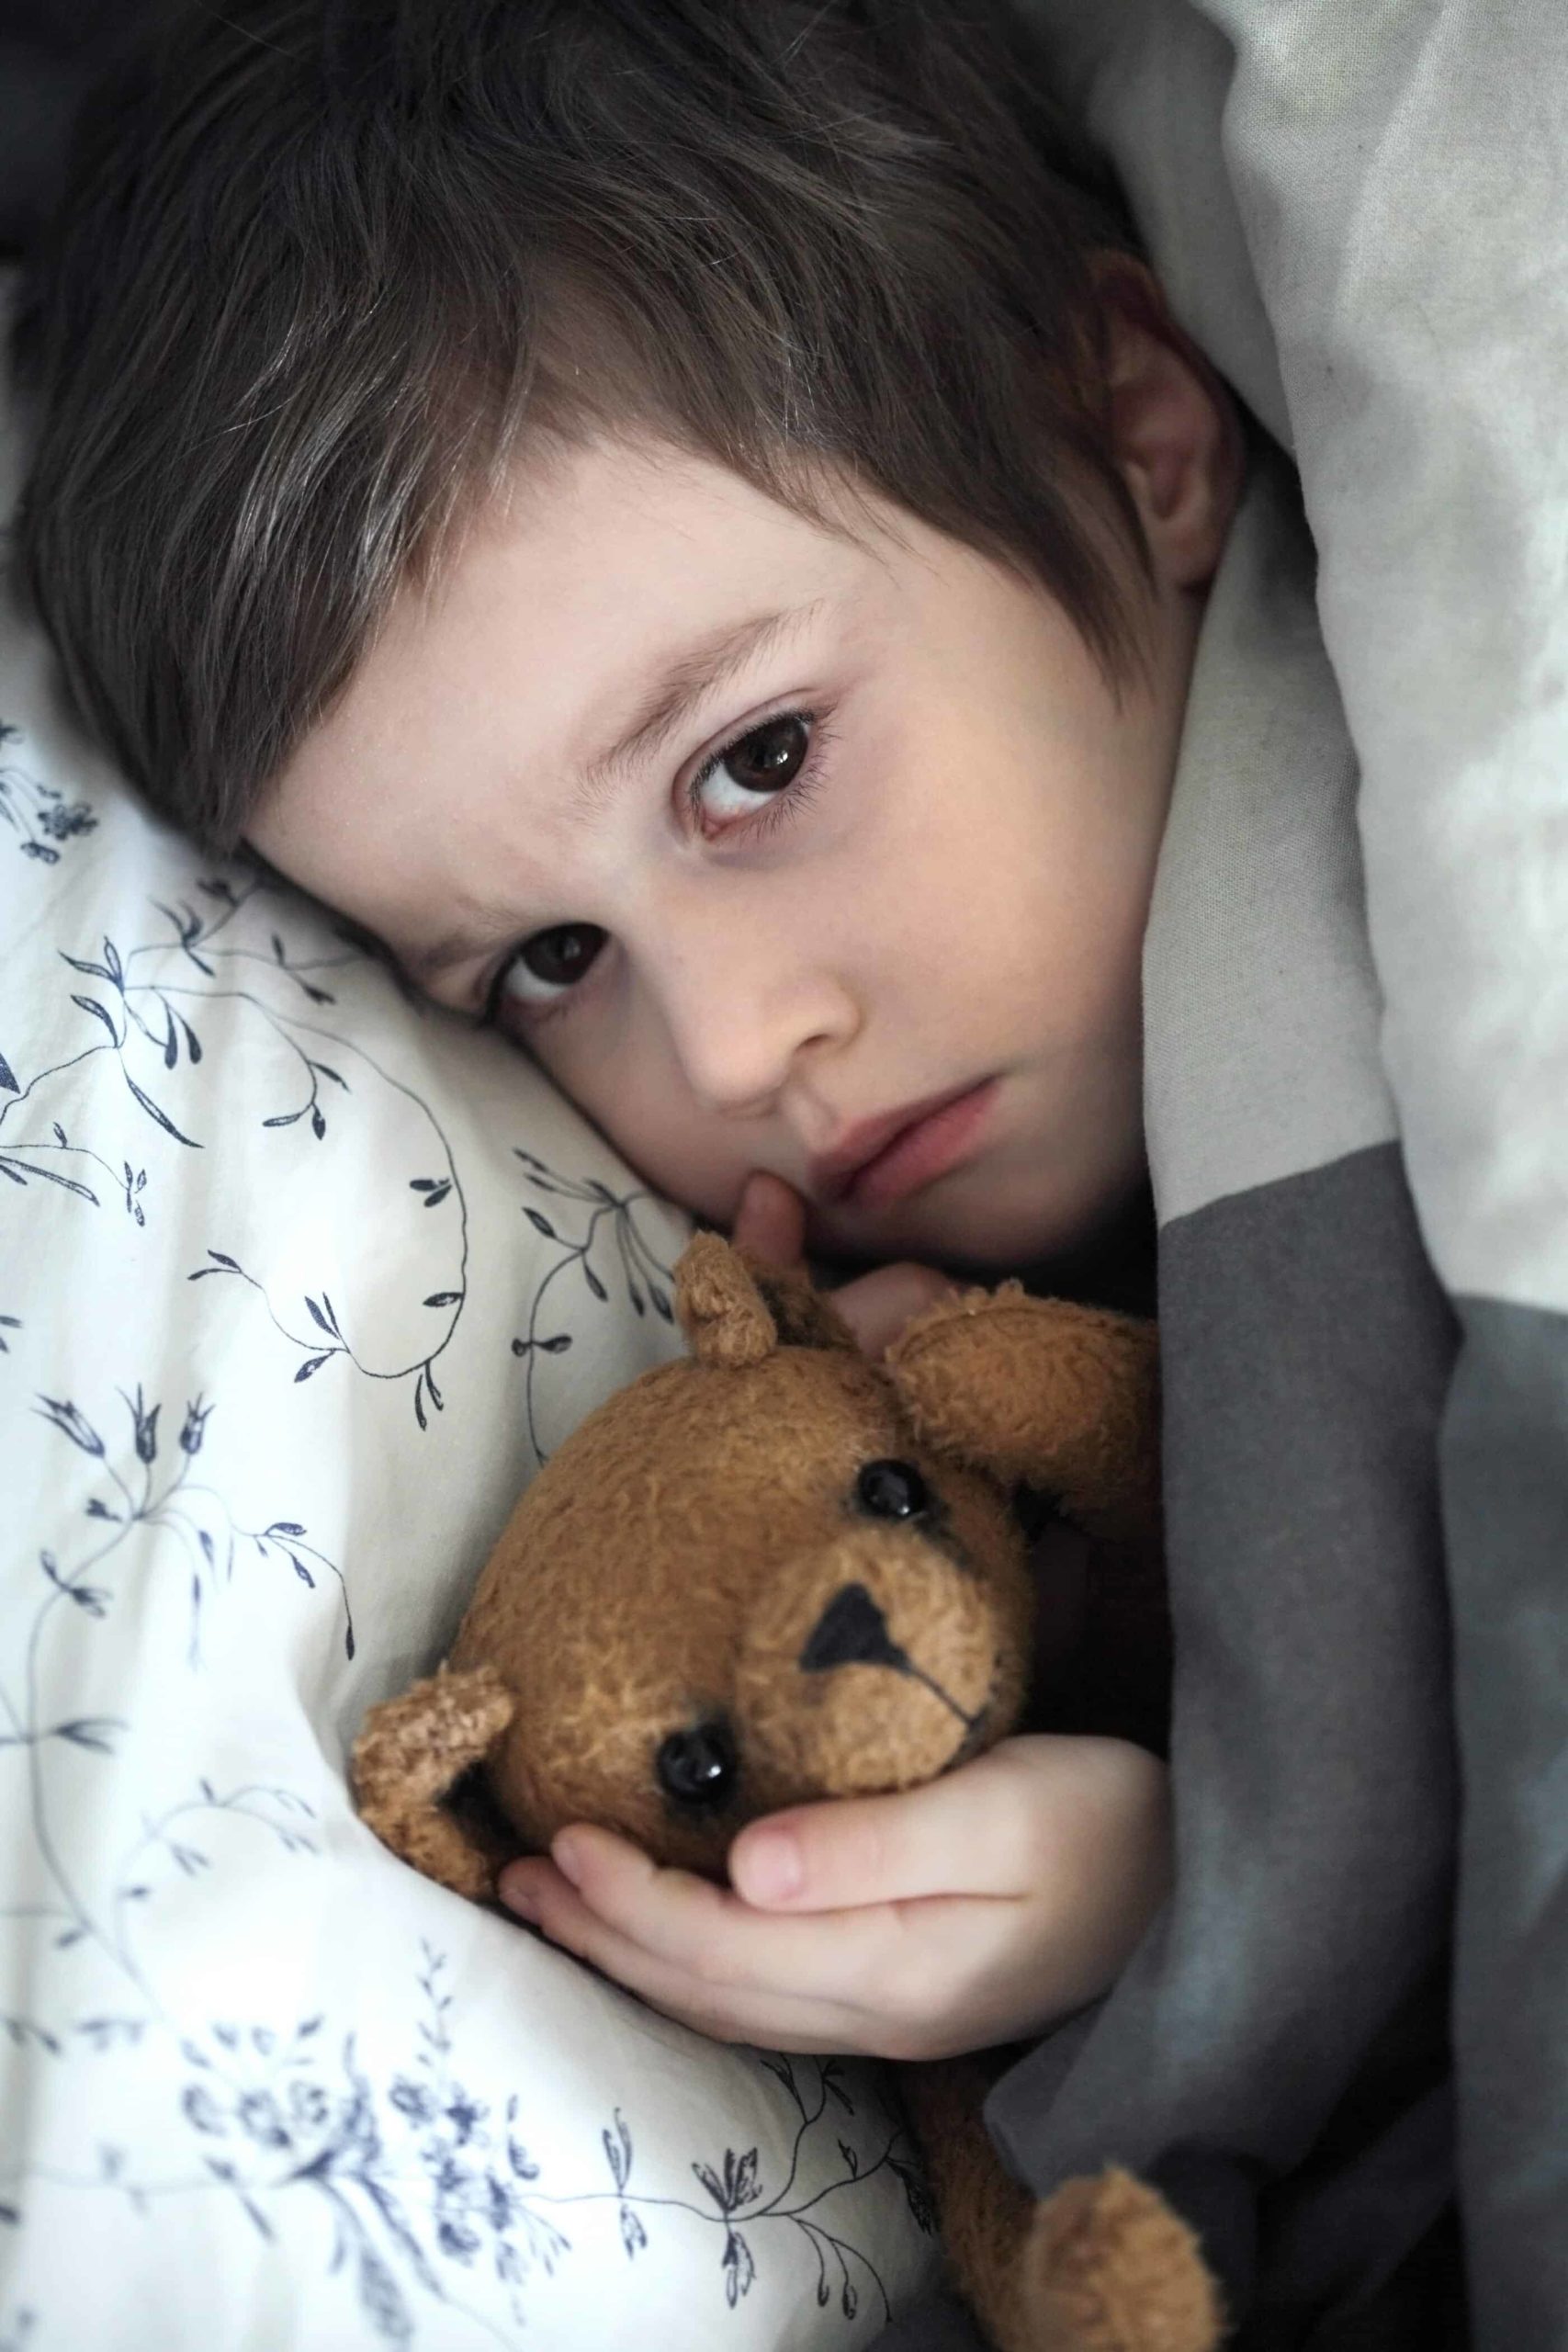 Small sad boy in bed, holding his teddy bear.